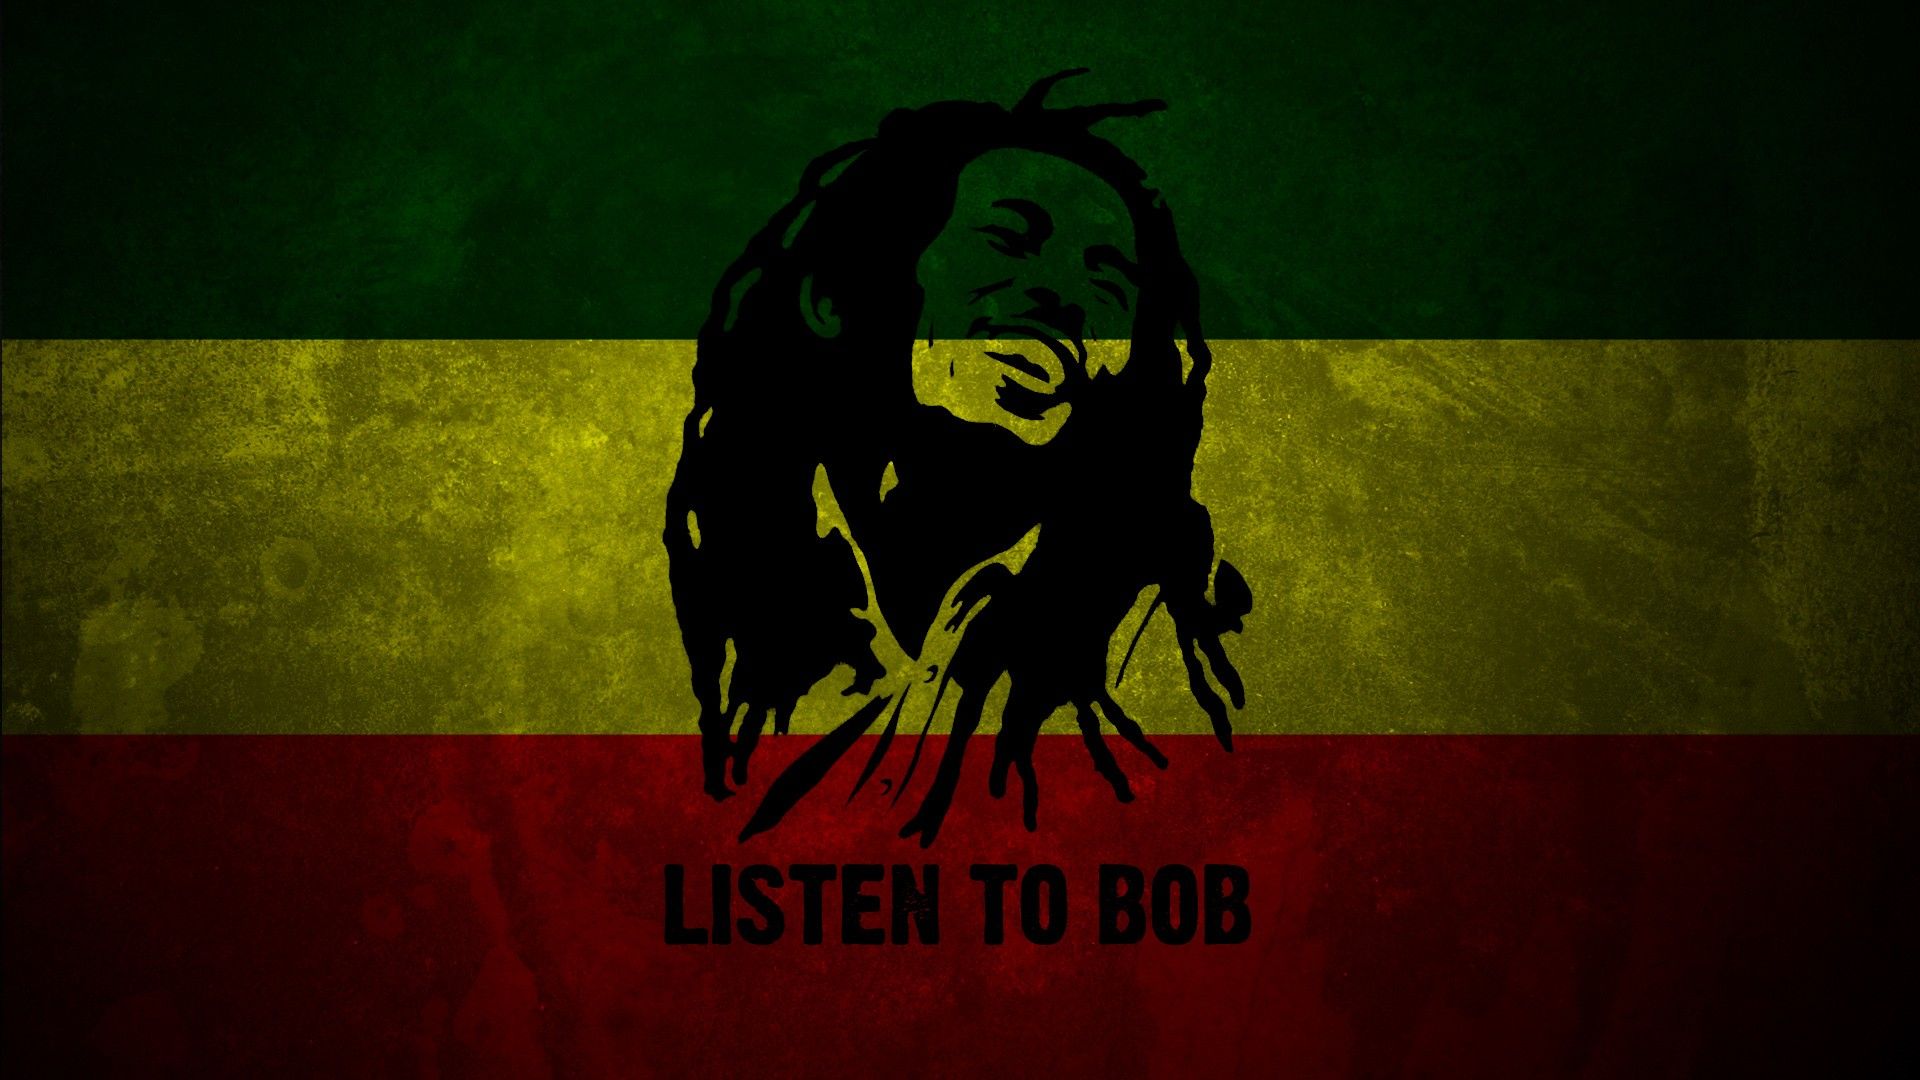 Colour Of Reggae Mobile Wallpaper Pictures To Pin